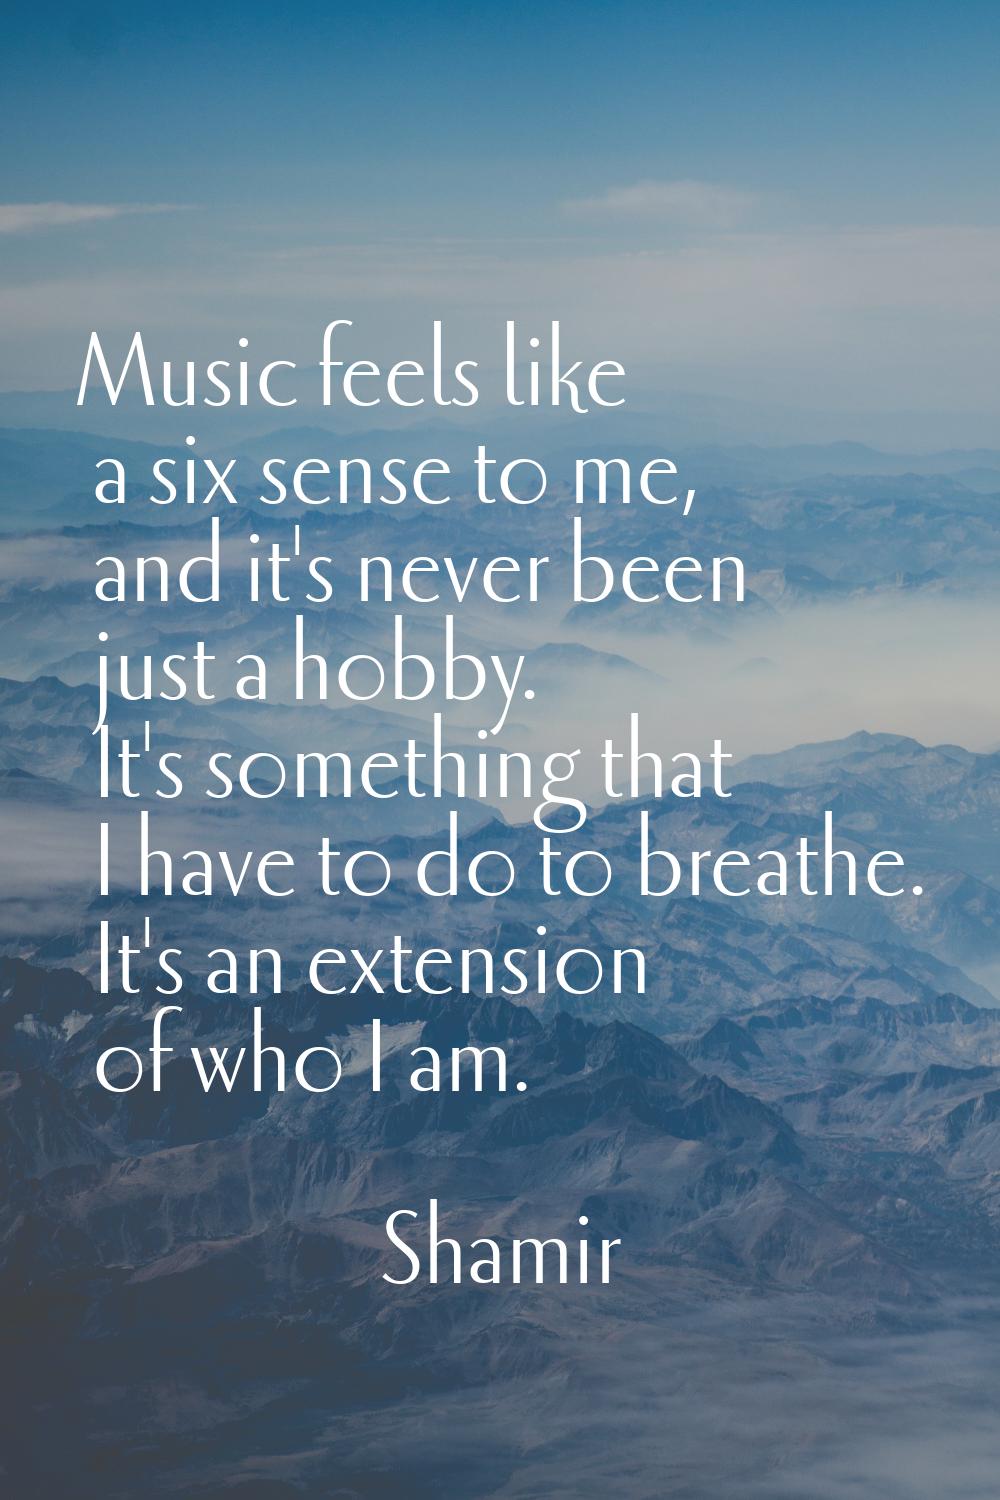 Music feels like a six sense to me, and it's never been just a hobby. It's something that I have to